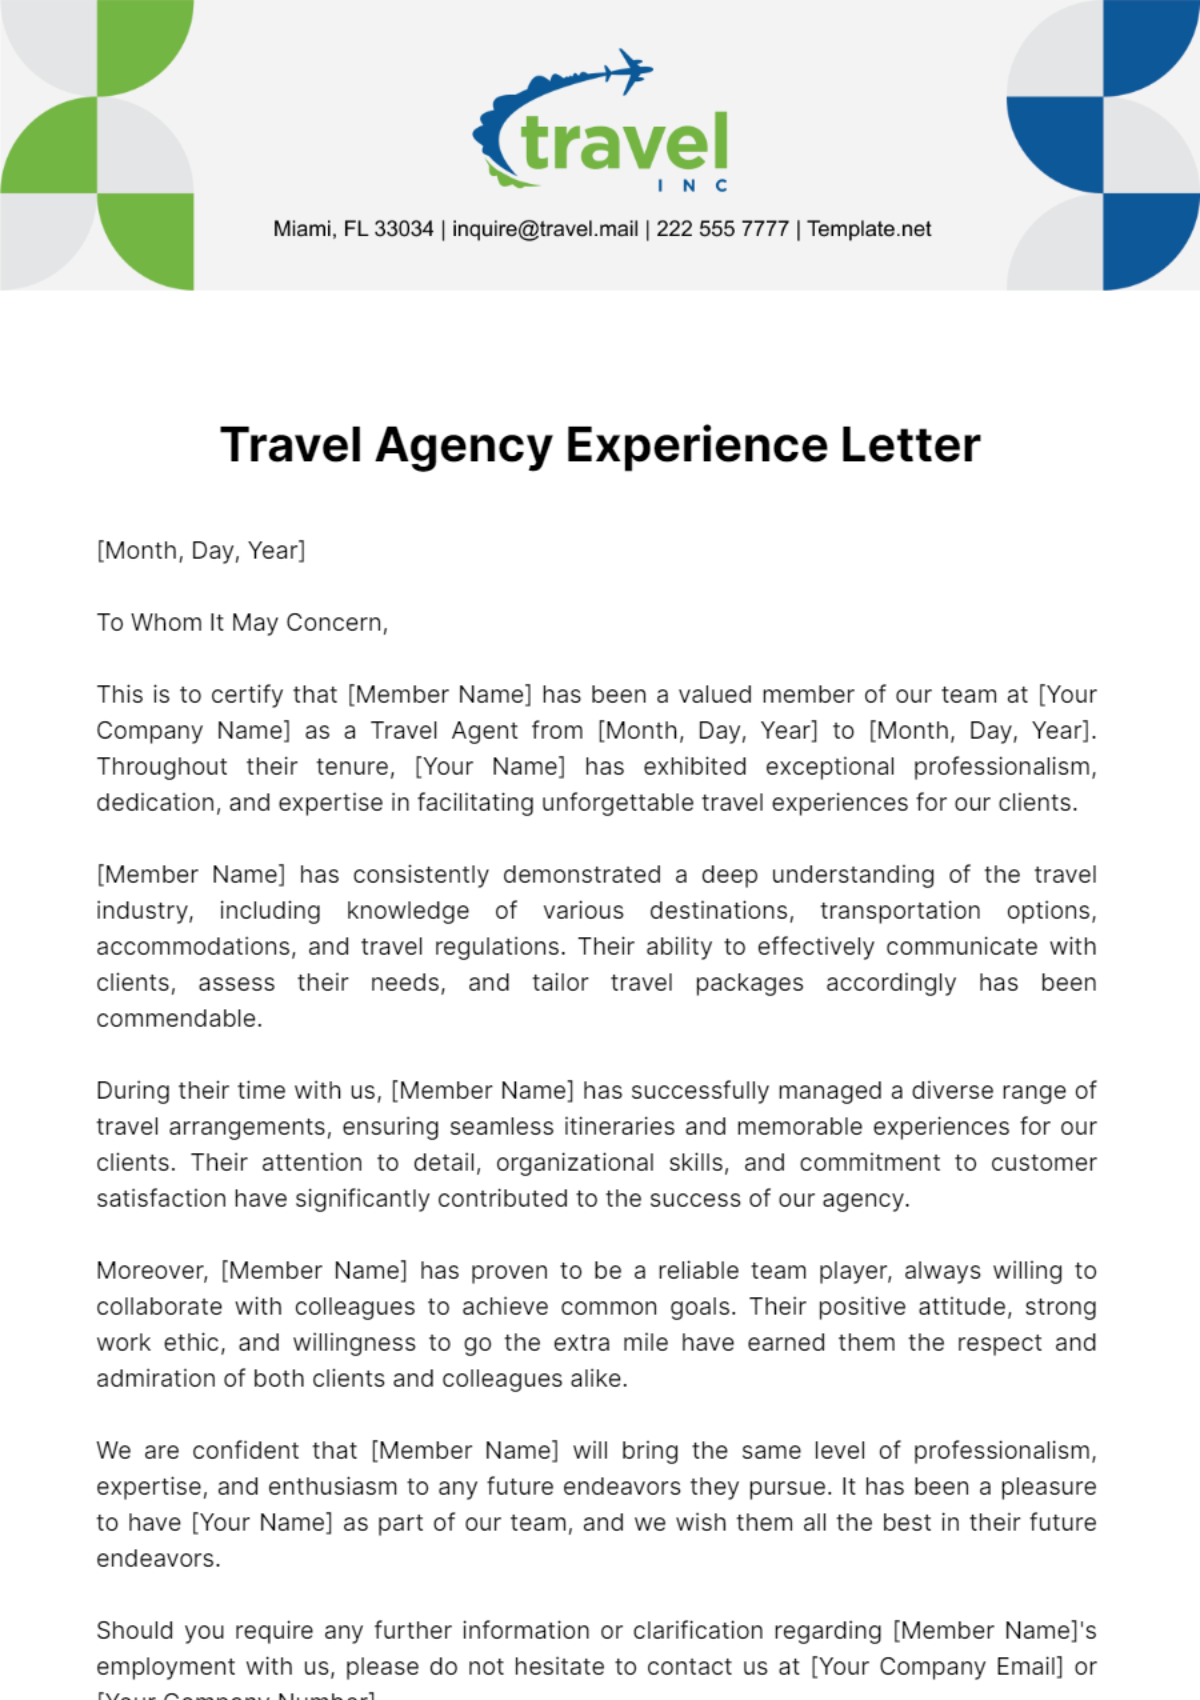 Free Travel Agency Experience Letter Template